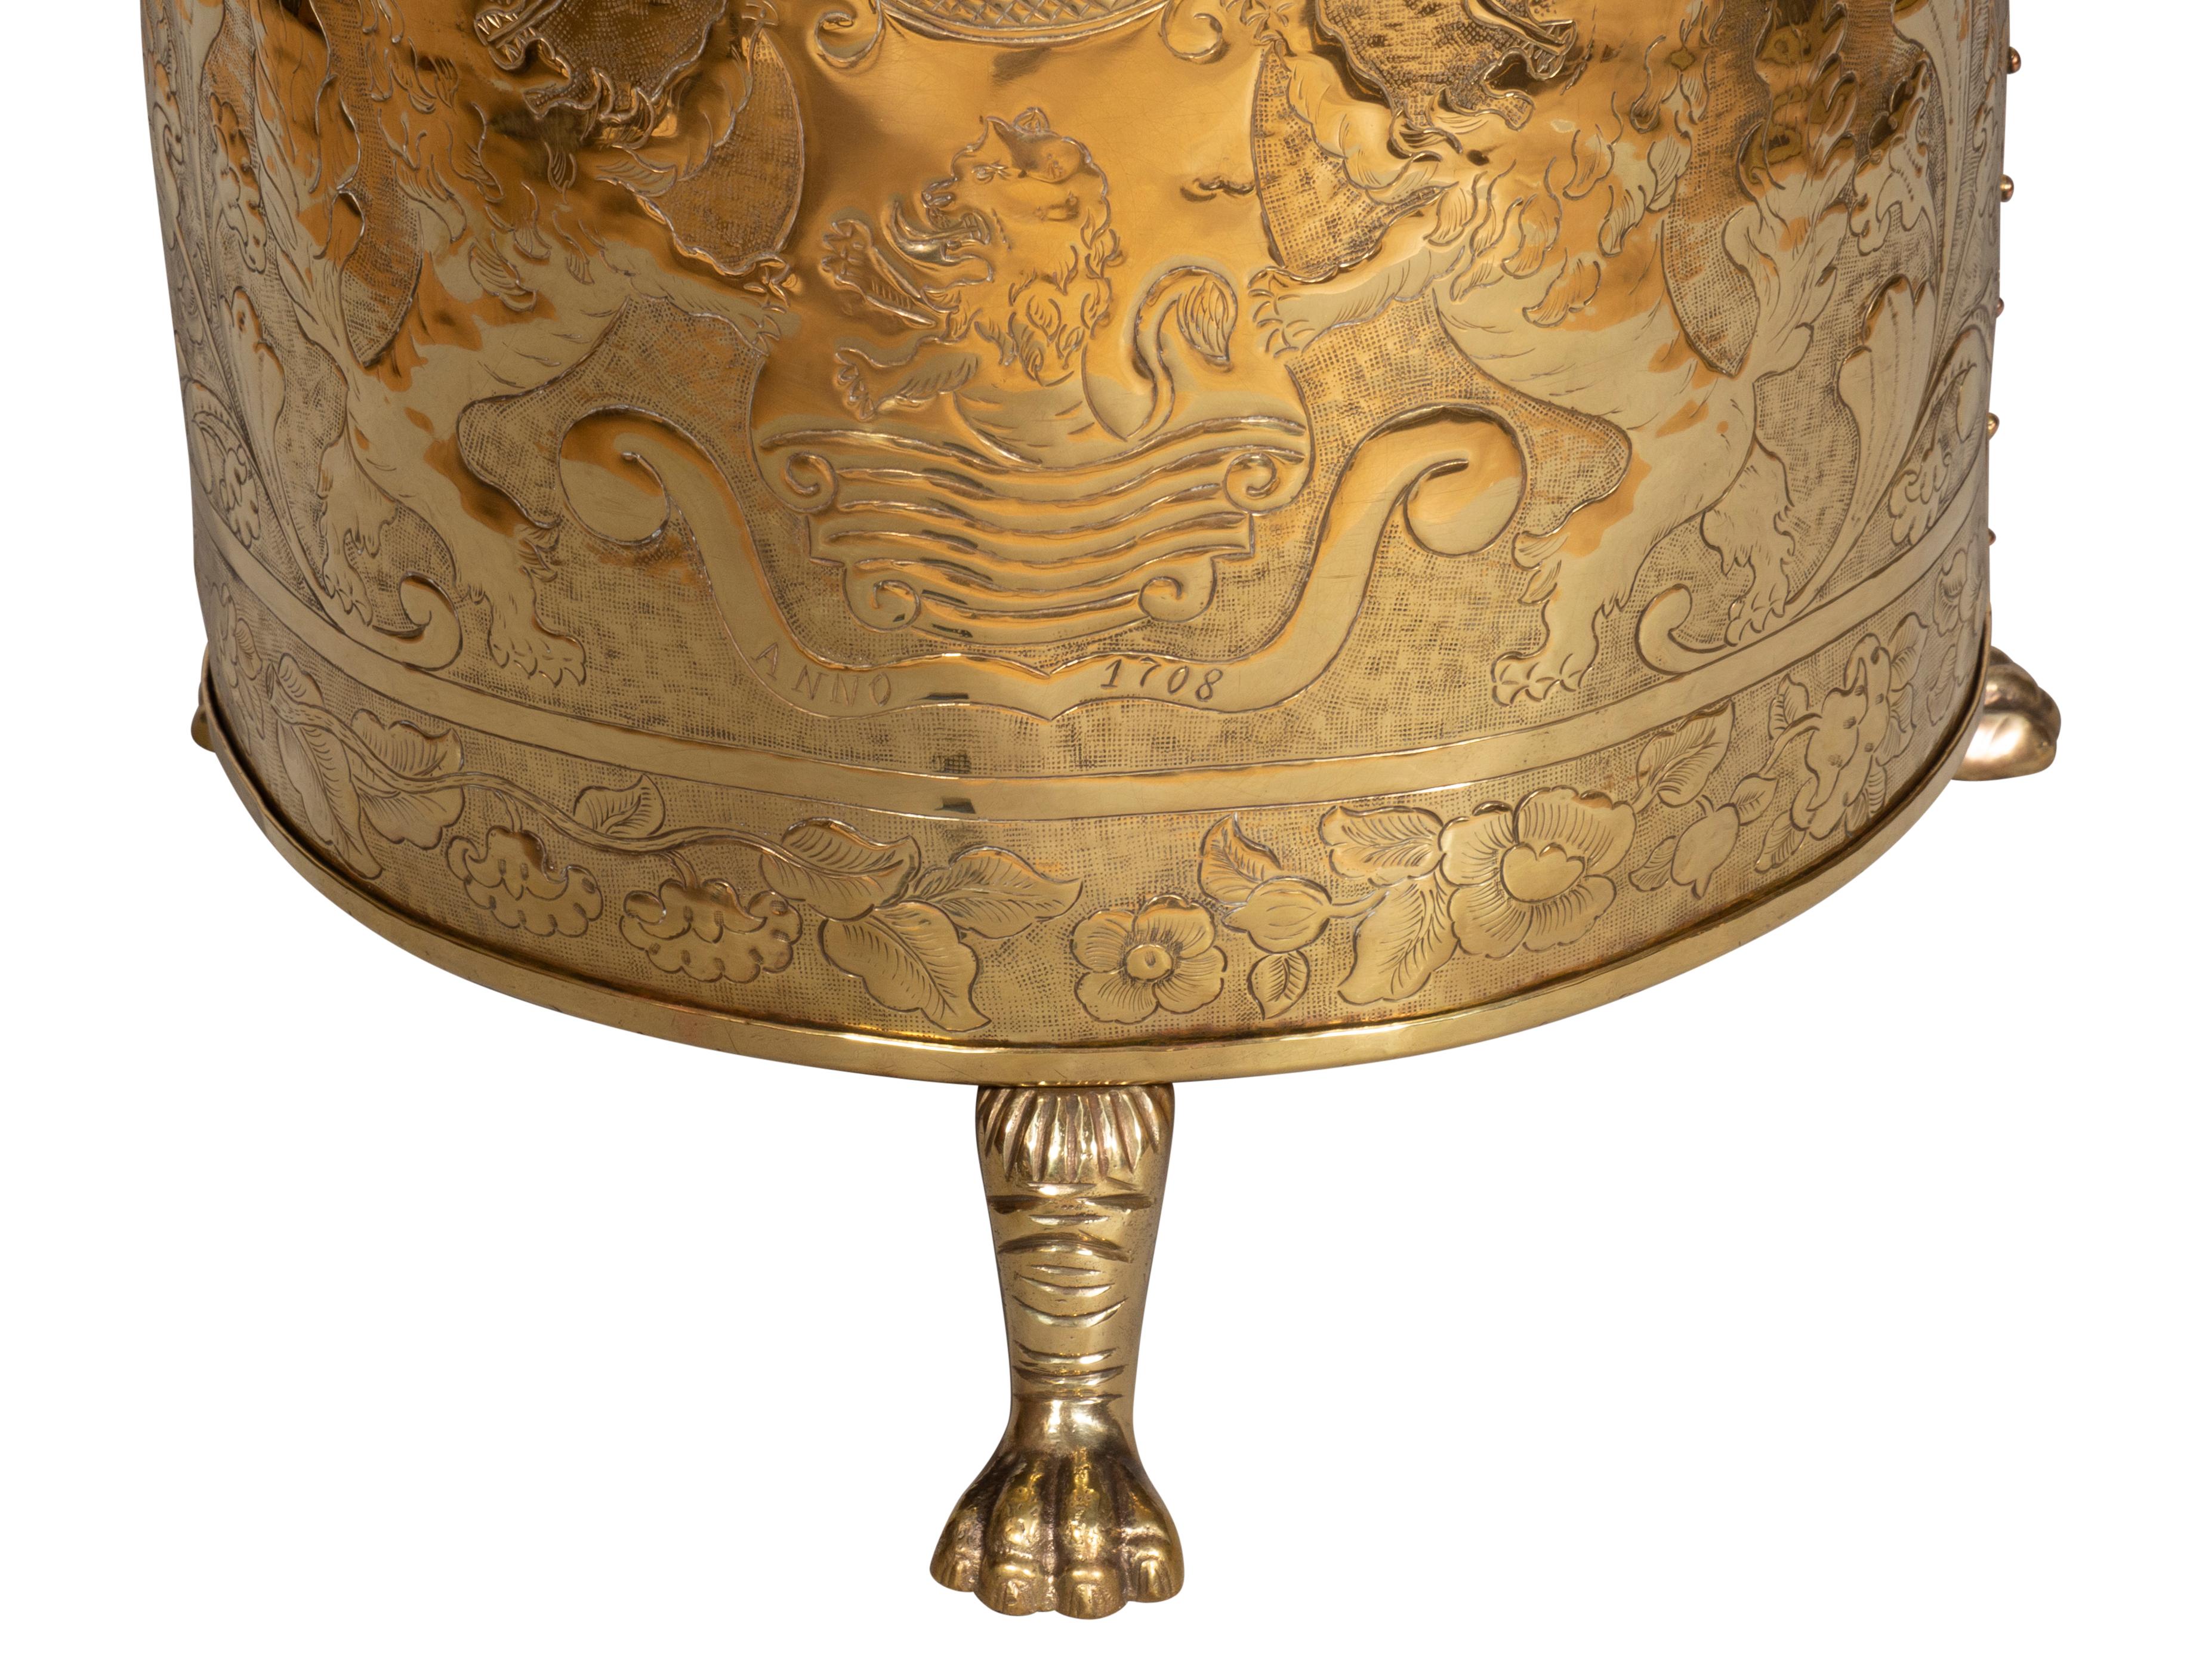 Cylindrical with lions head handles and overall rampant lion hammered decoration. Brass feet.